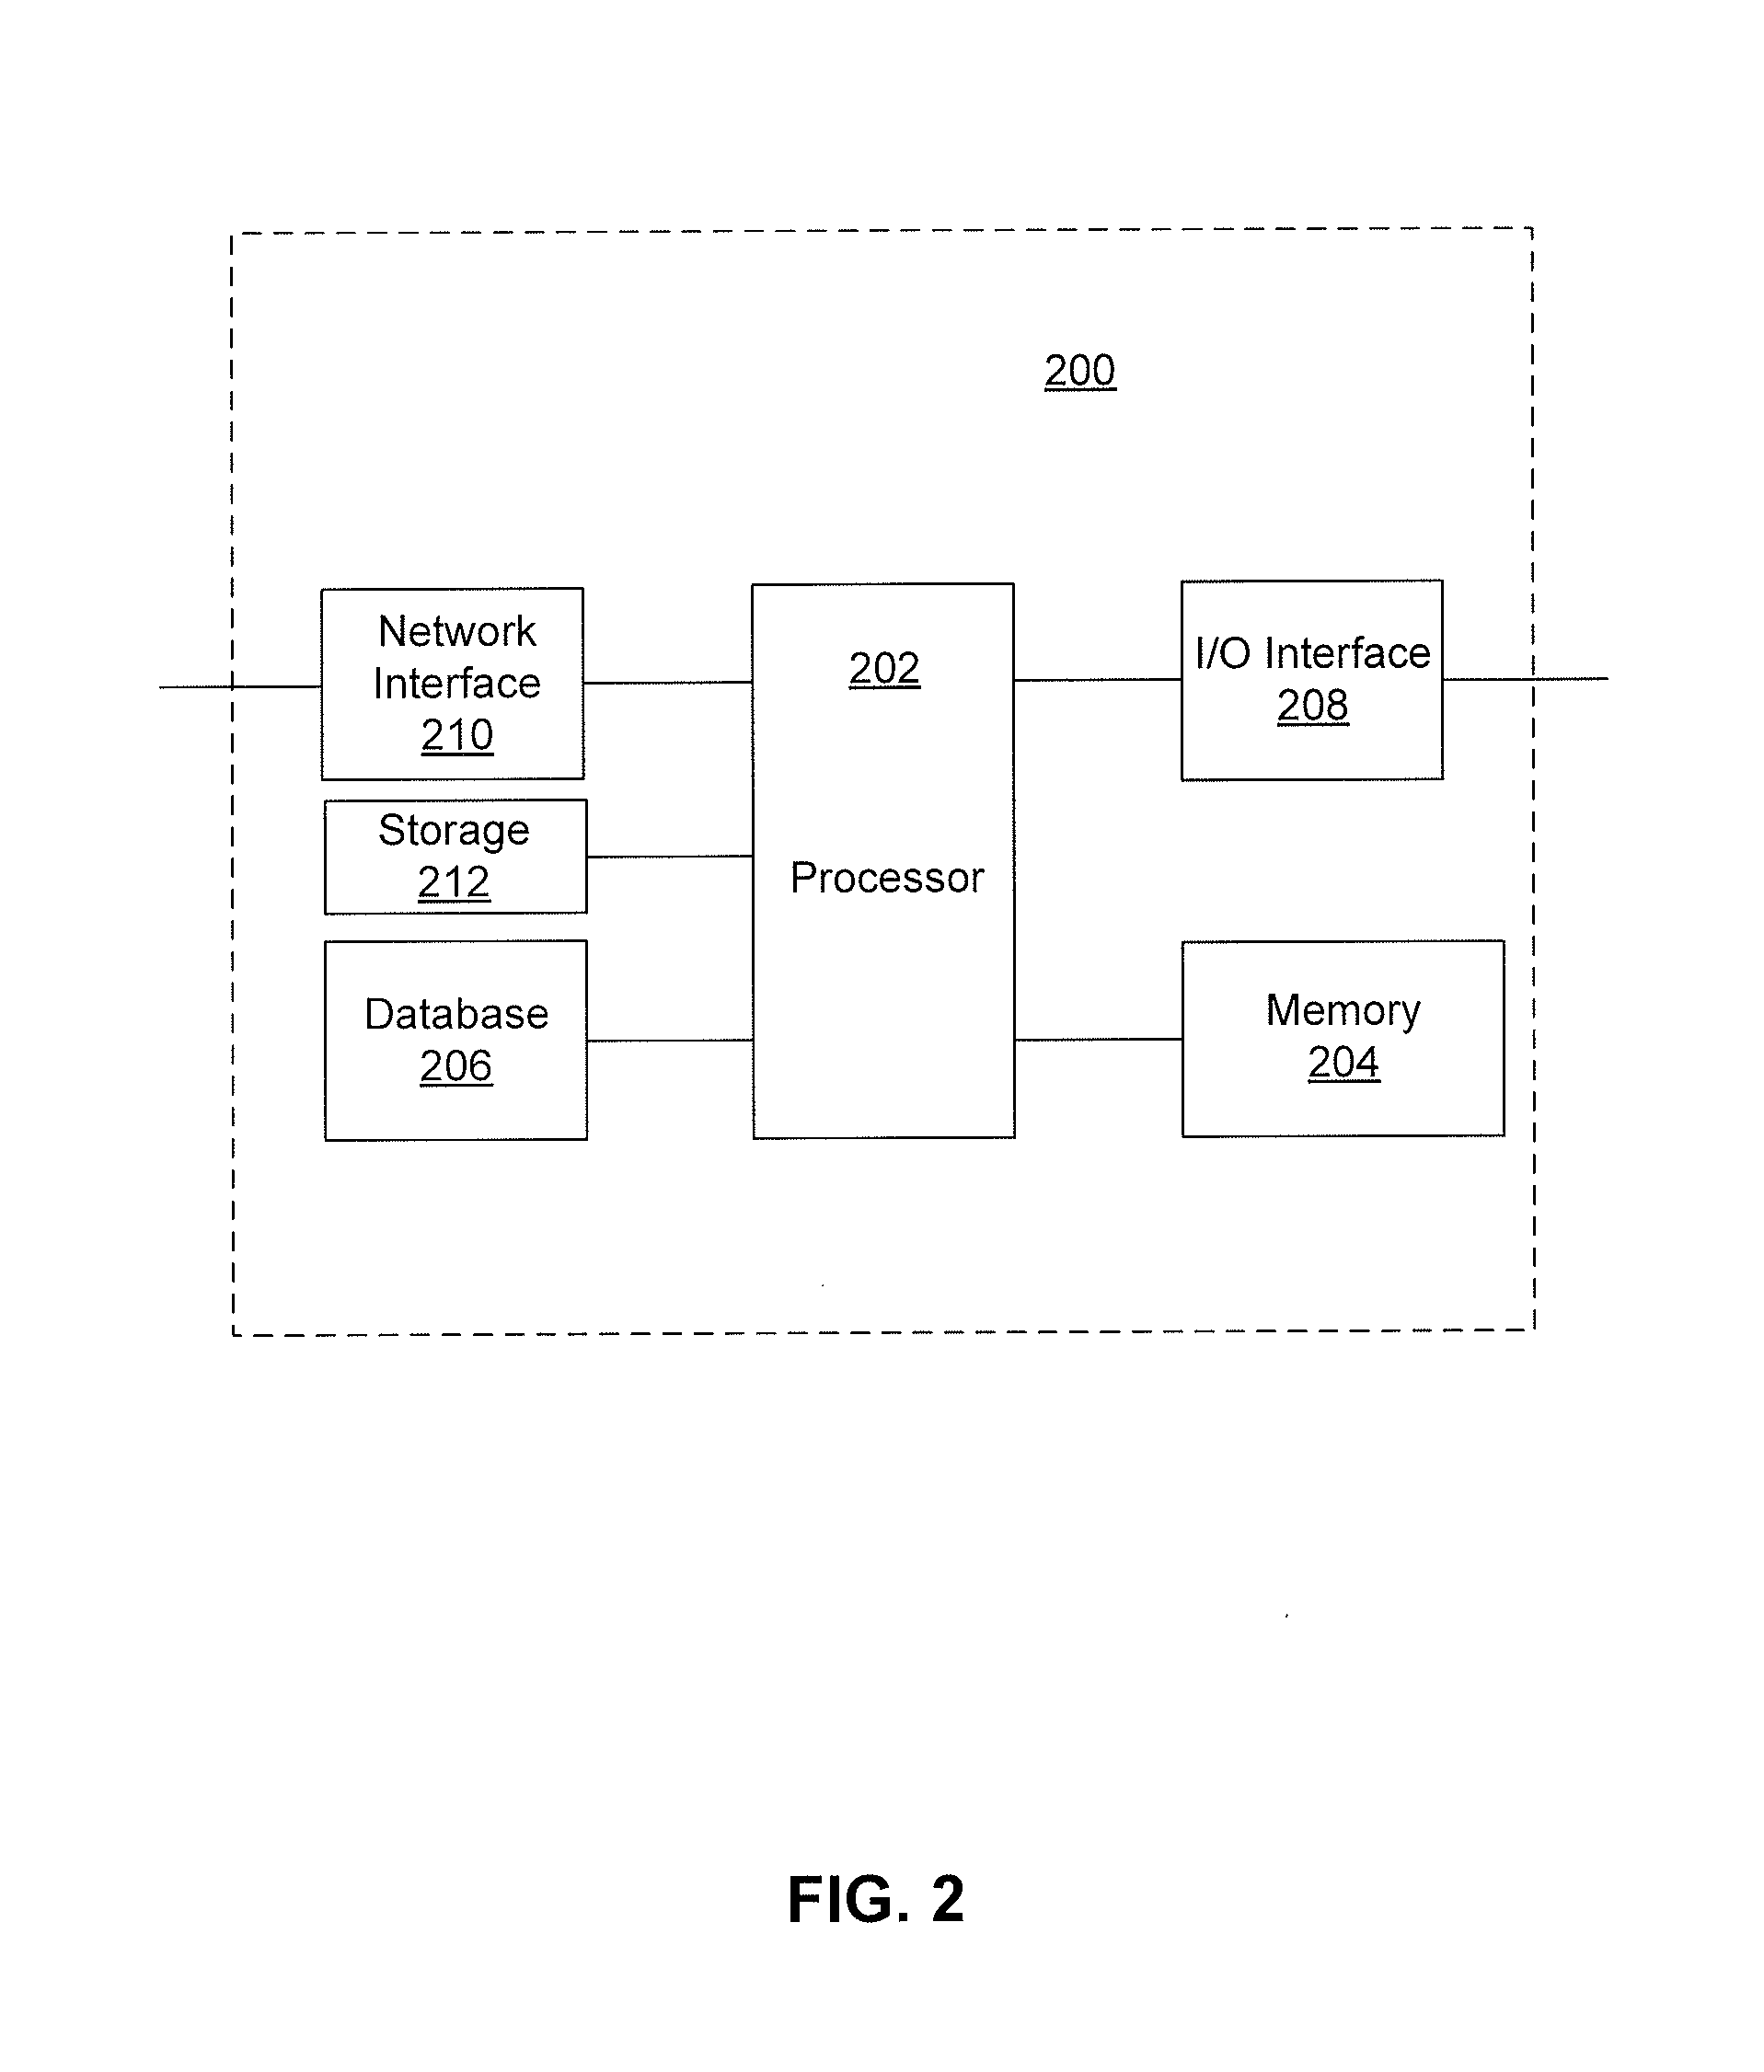 Virtual sensor system and method for generating output parameters